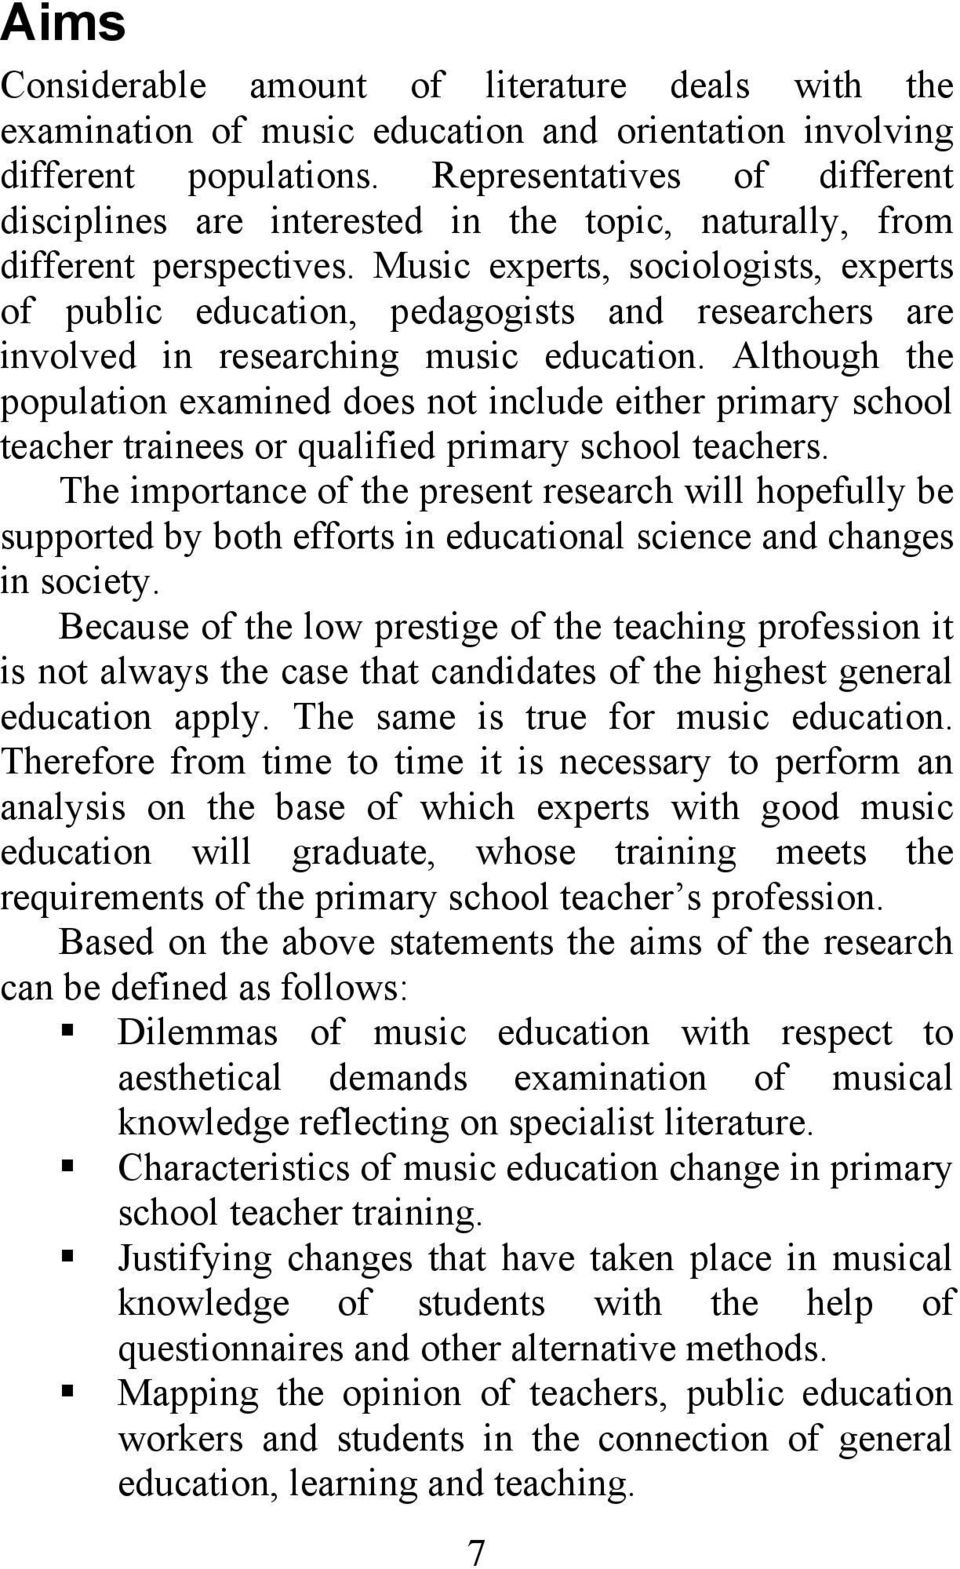 Music experts, sociologists, experts of public education, pedagogists and researchers are involved in researching music education.